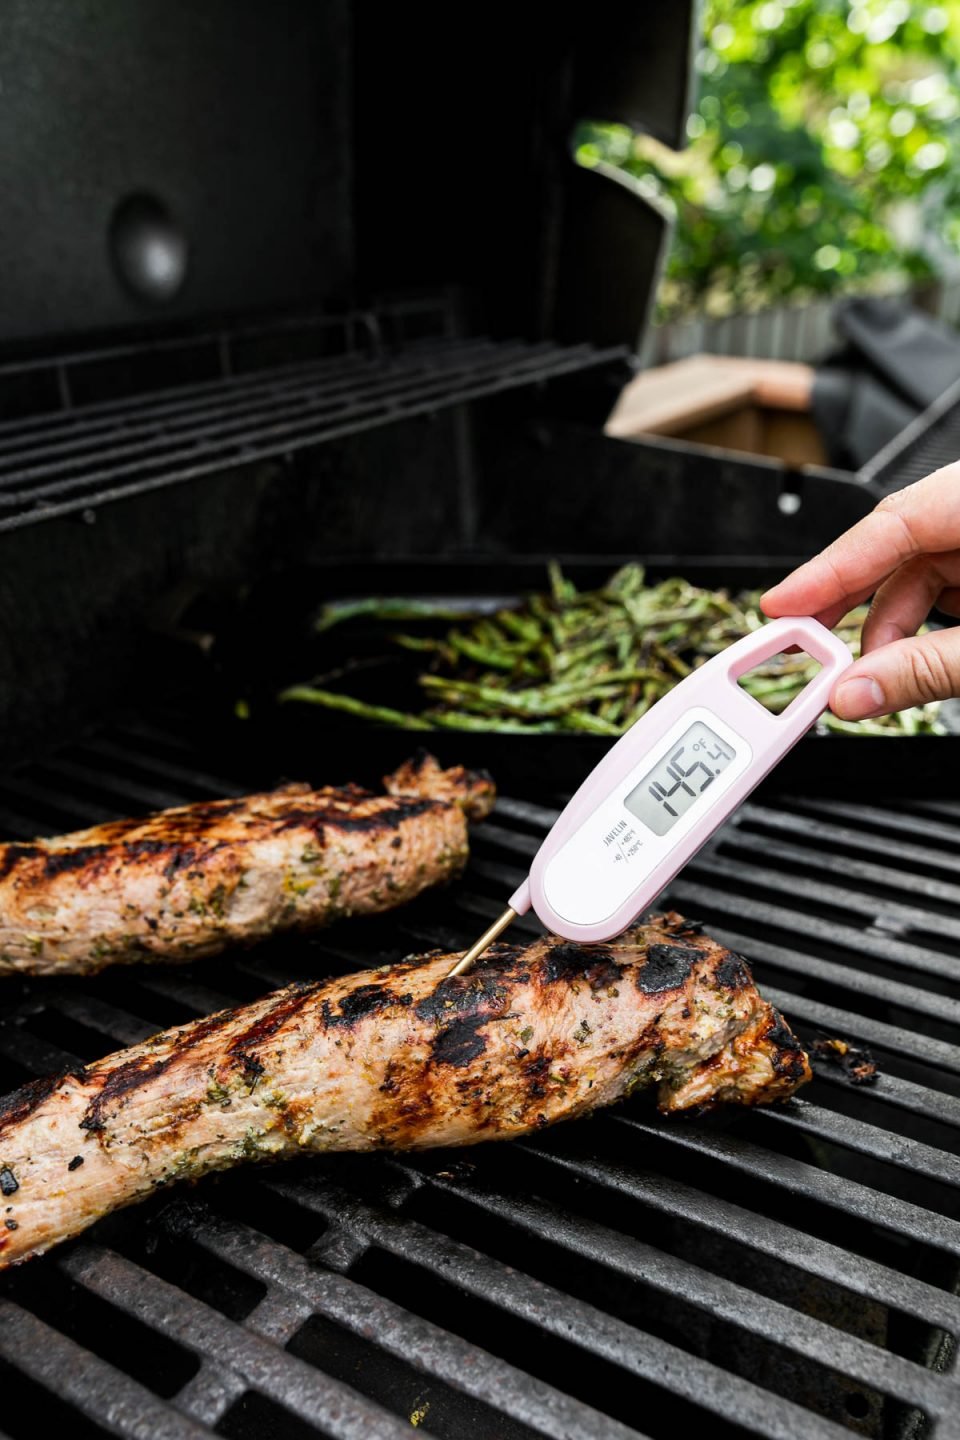 Two Lemon Garlic Grilled Pork Tenderloins on a gas grill. A woman's hand holds a pink instant read meat thermometer that is taking the internal temperature of one of the tenderloins. The thermometer registers at 145 degrees F. A grill basket rests on the grill grates in the background with char-grilled green beans cooking.